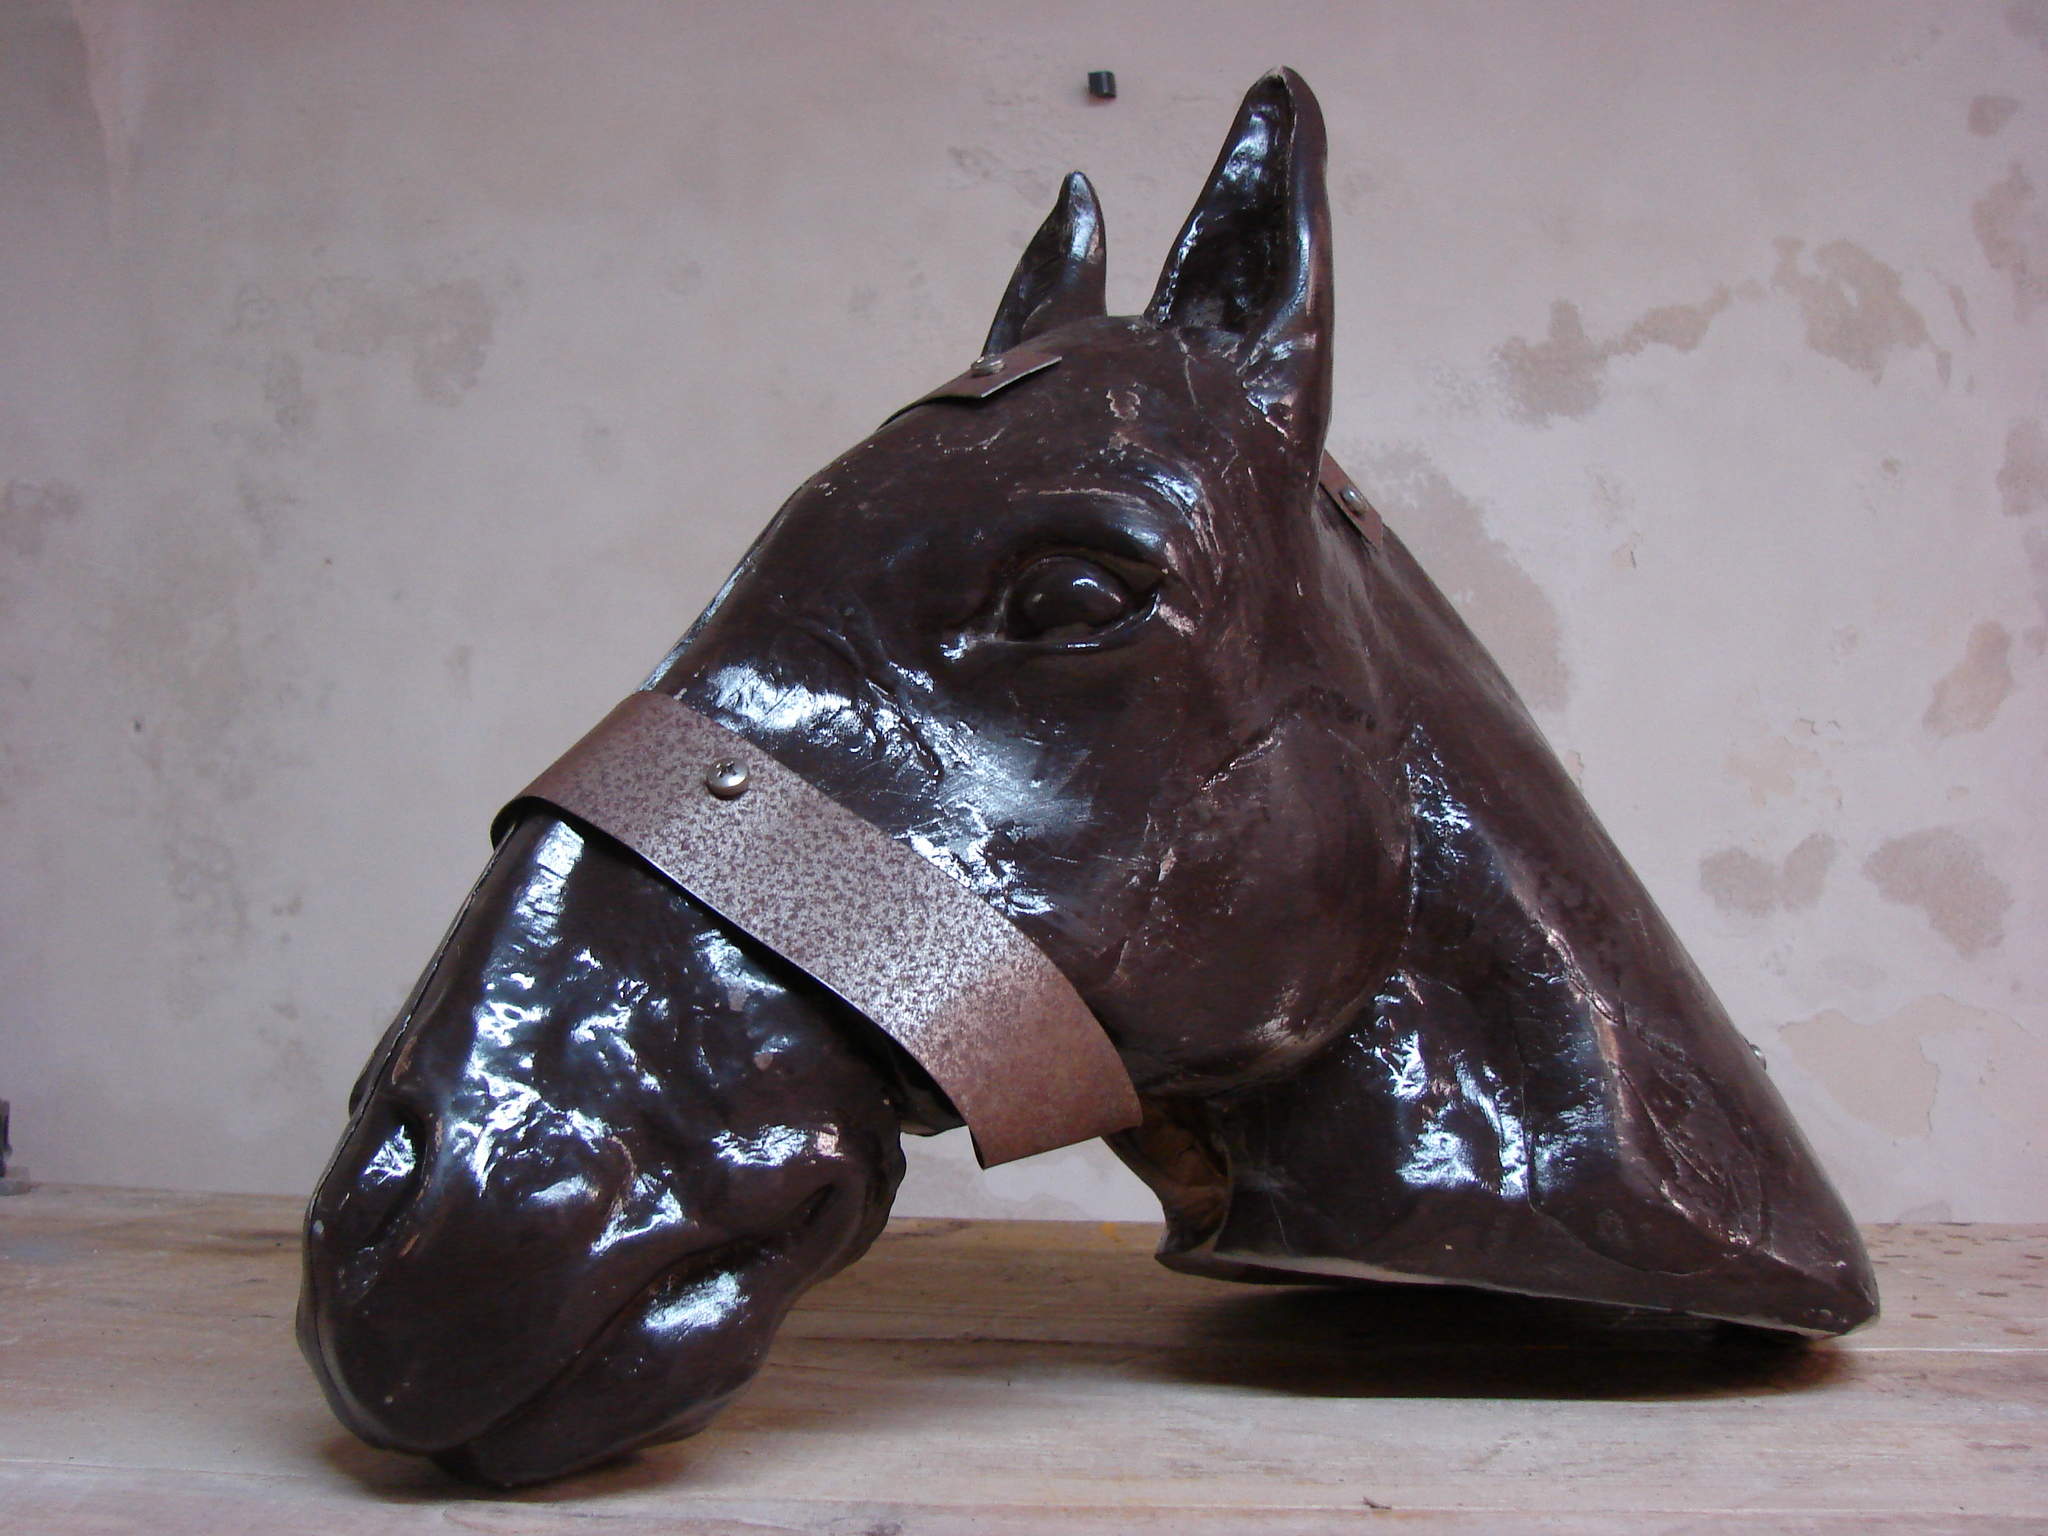 Horse, Caterina Silenzi art, Ceramic and Iron.
PRIVATE COLLECTION